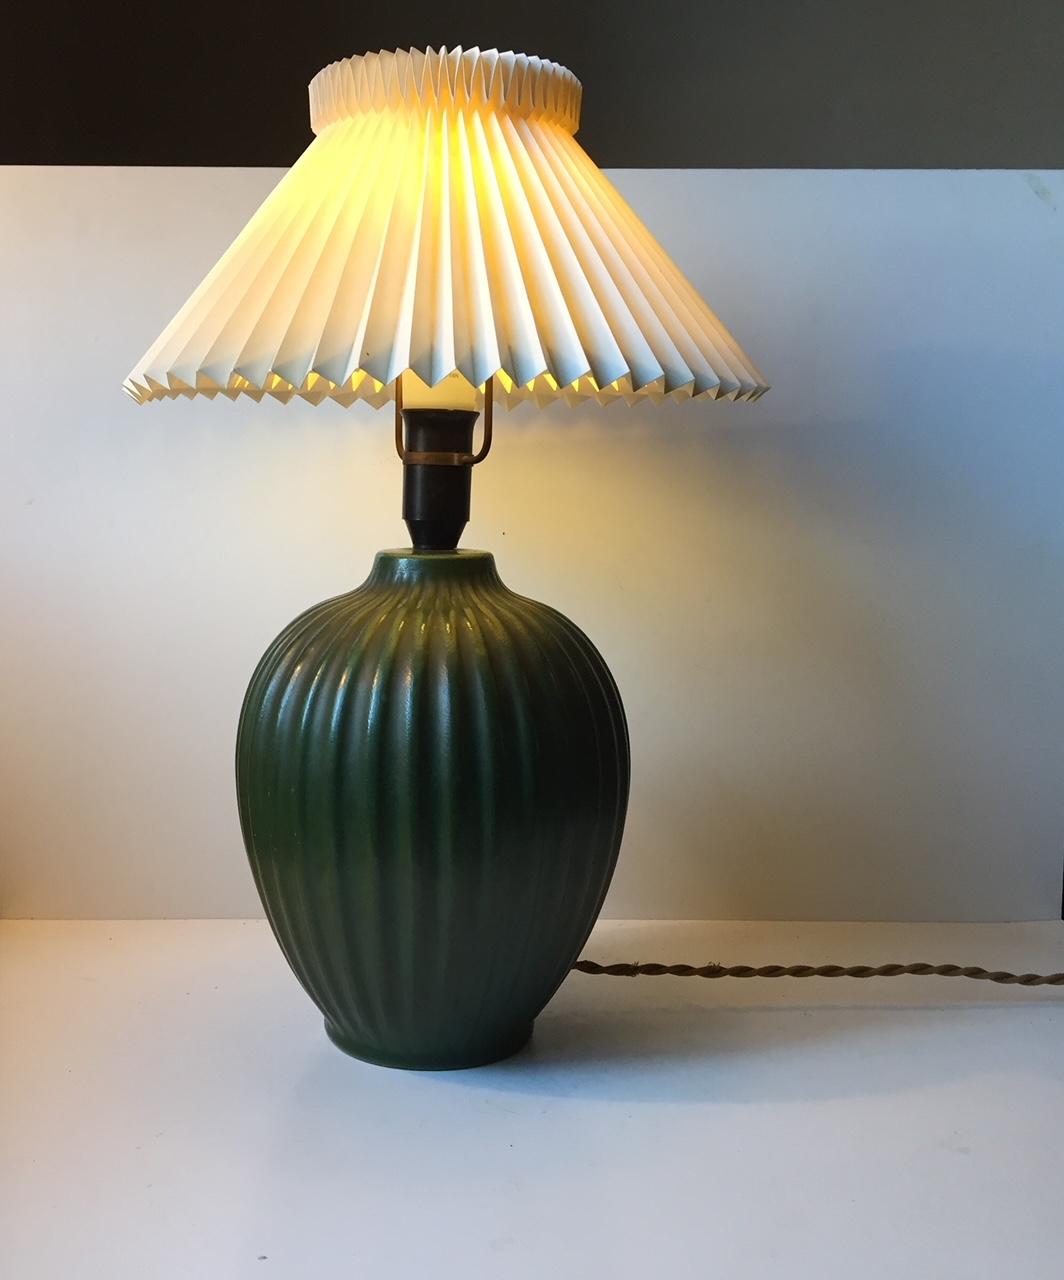 From a distance this lamp looks like its made of bronze. However its all ceramic that has been applied with a verdigris green glaze to its vertically fluted body. This rare table lamp base was made by Michael Andersen in Denmark during the late